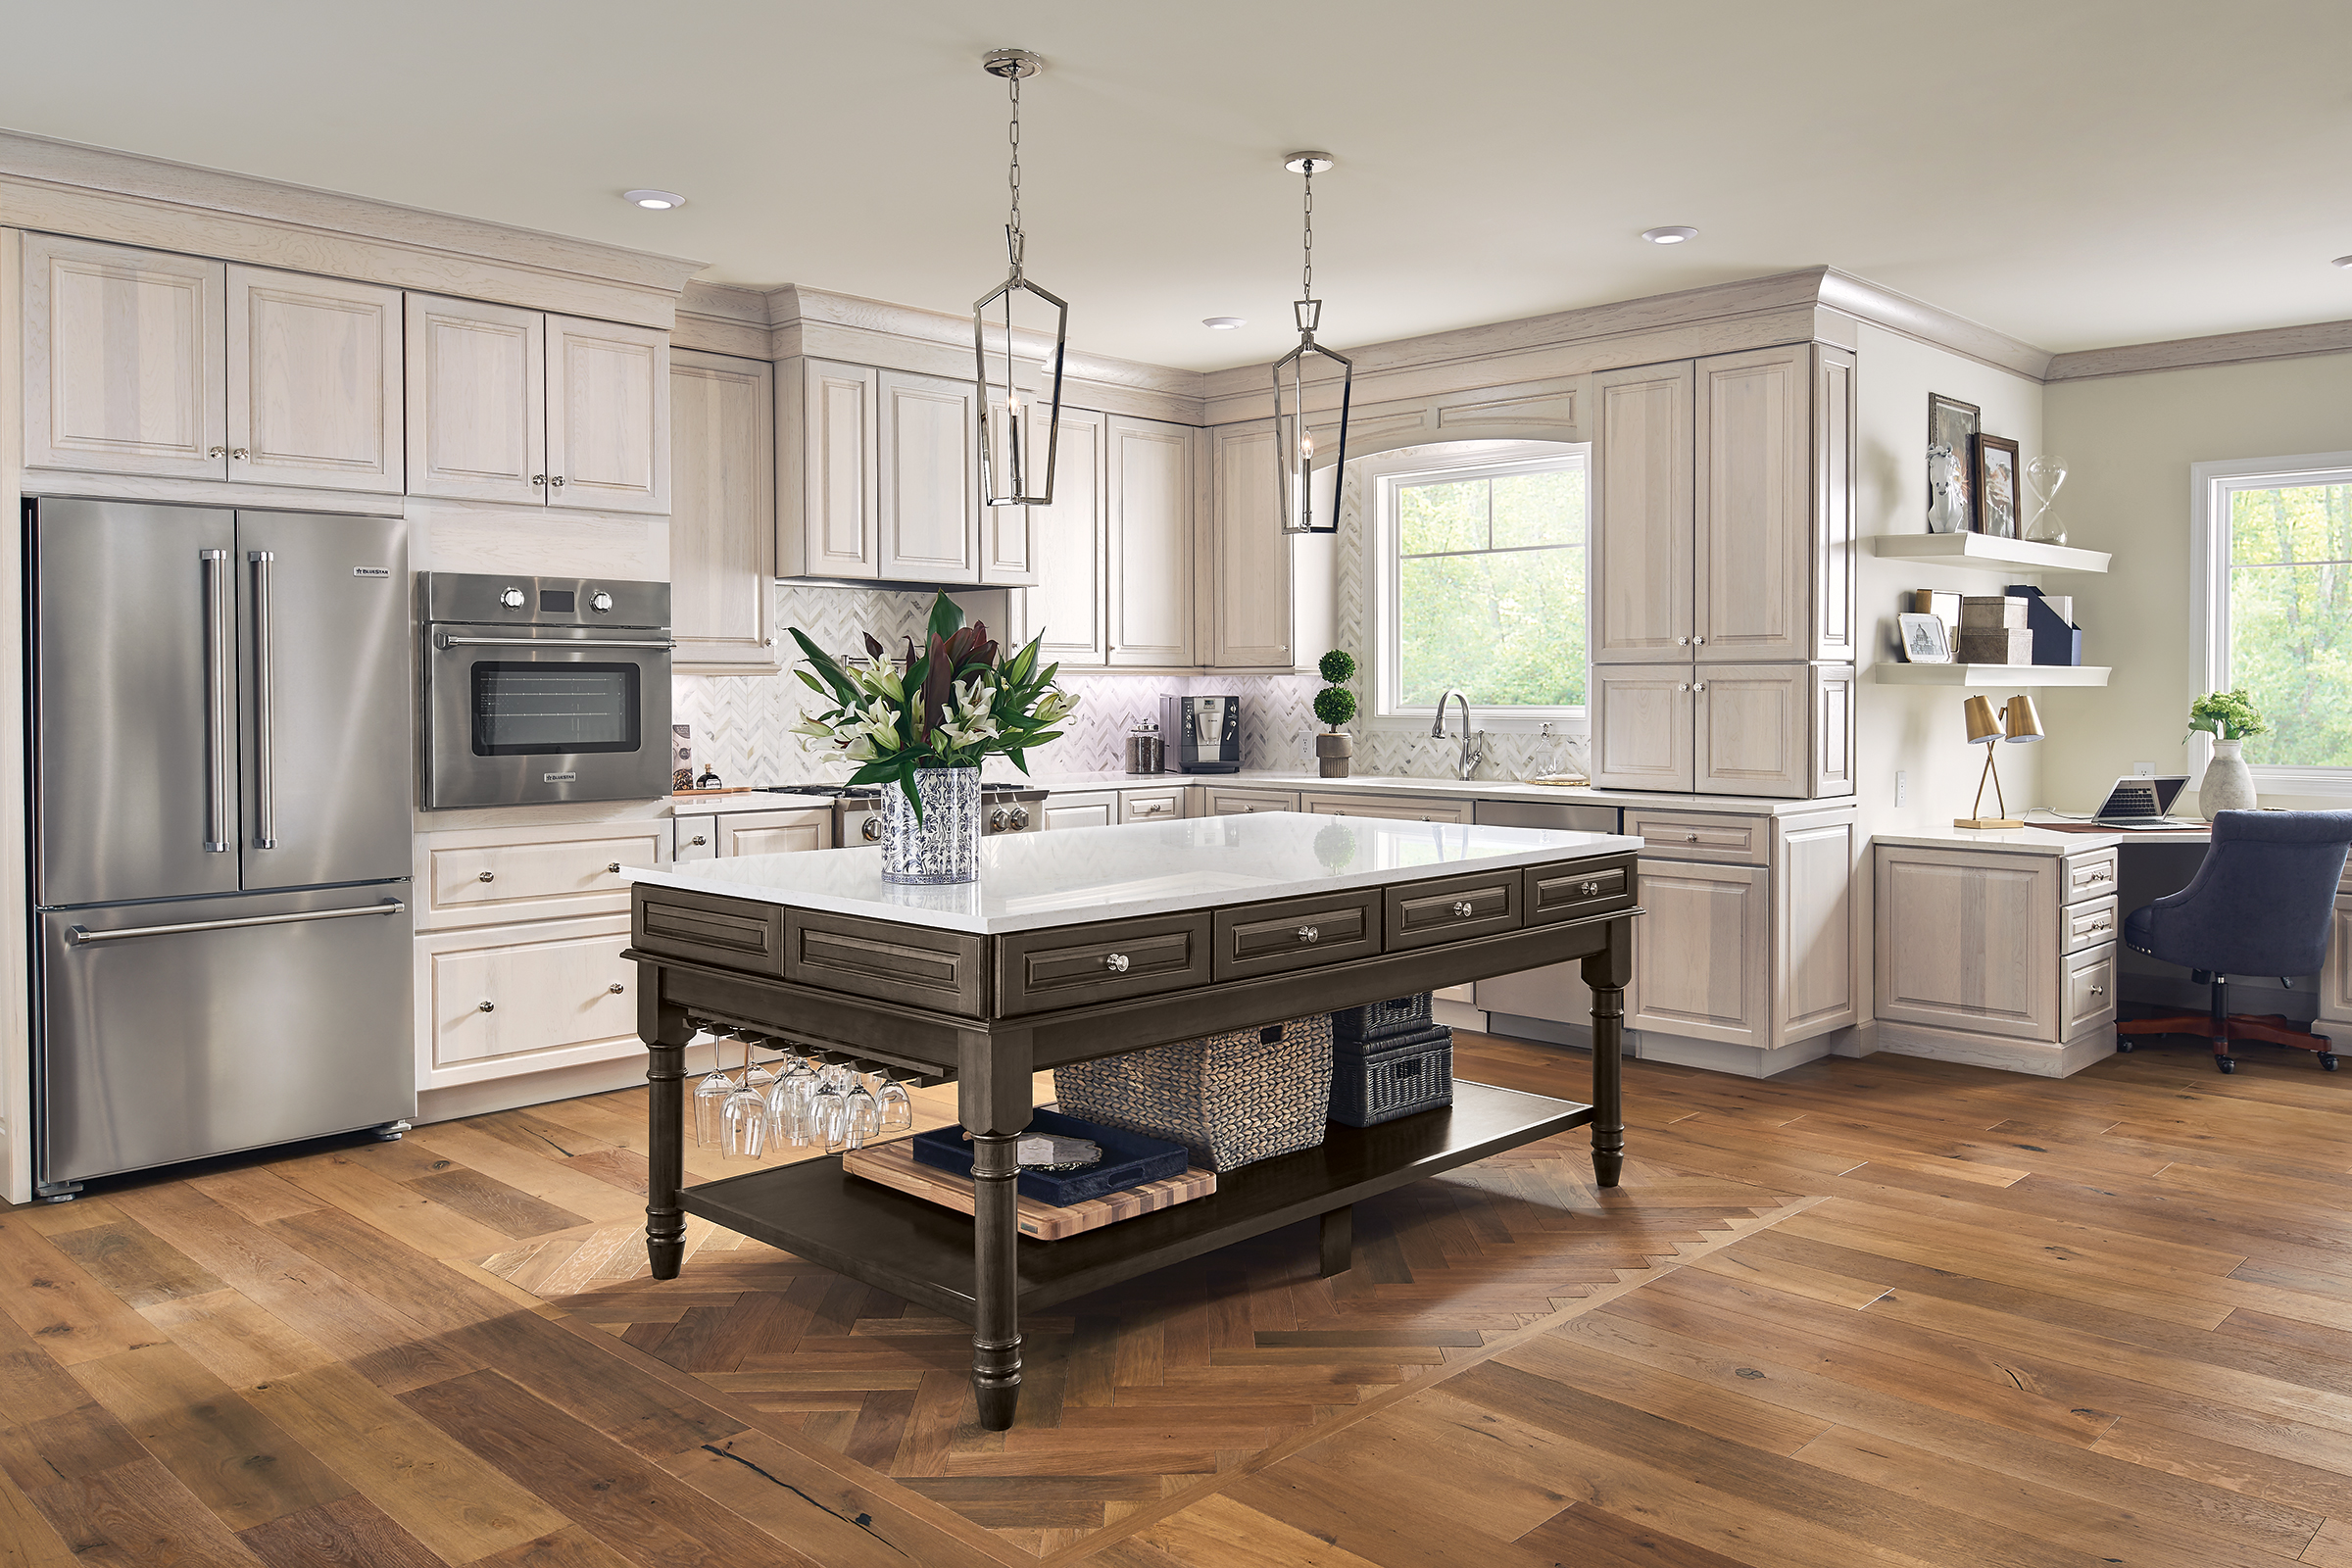 KraftMaid Open Kitchen Design with White Cabinet Finishes